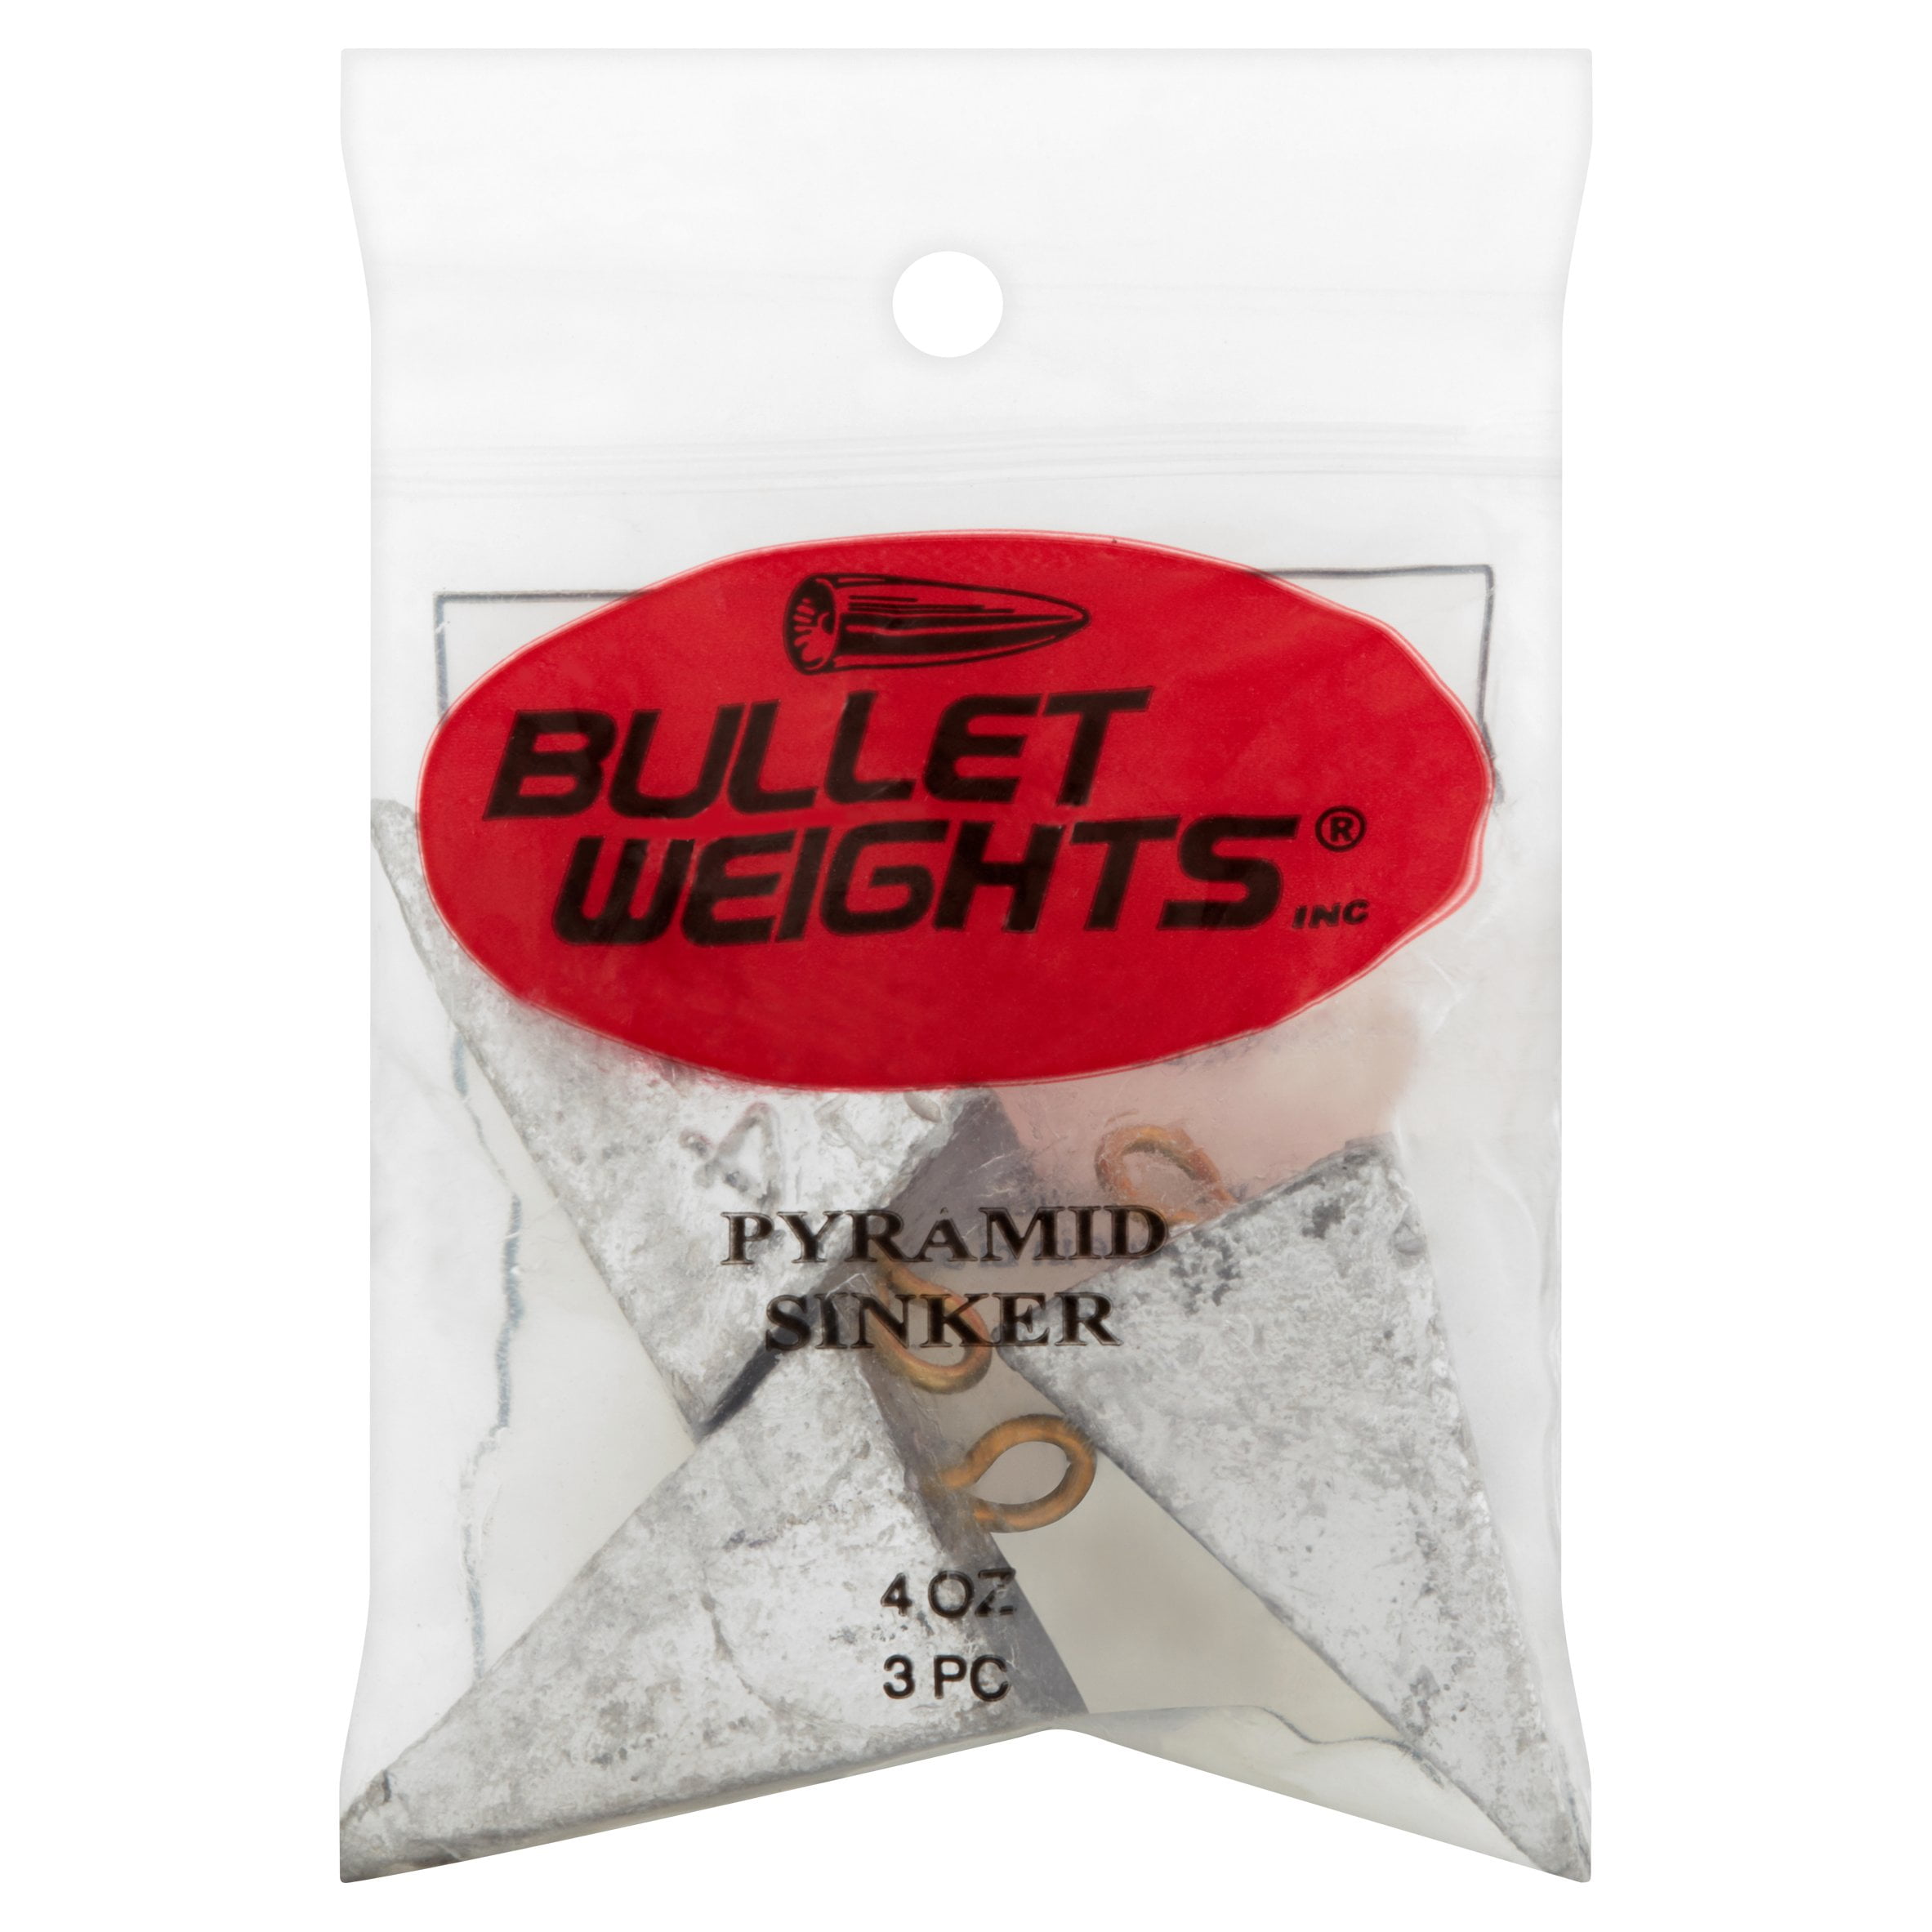 lot of 50 FREE SHIPPING 2oz pyramid sinkers 